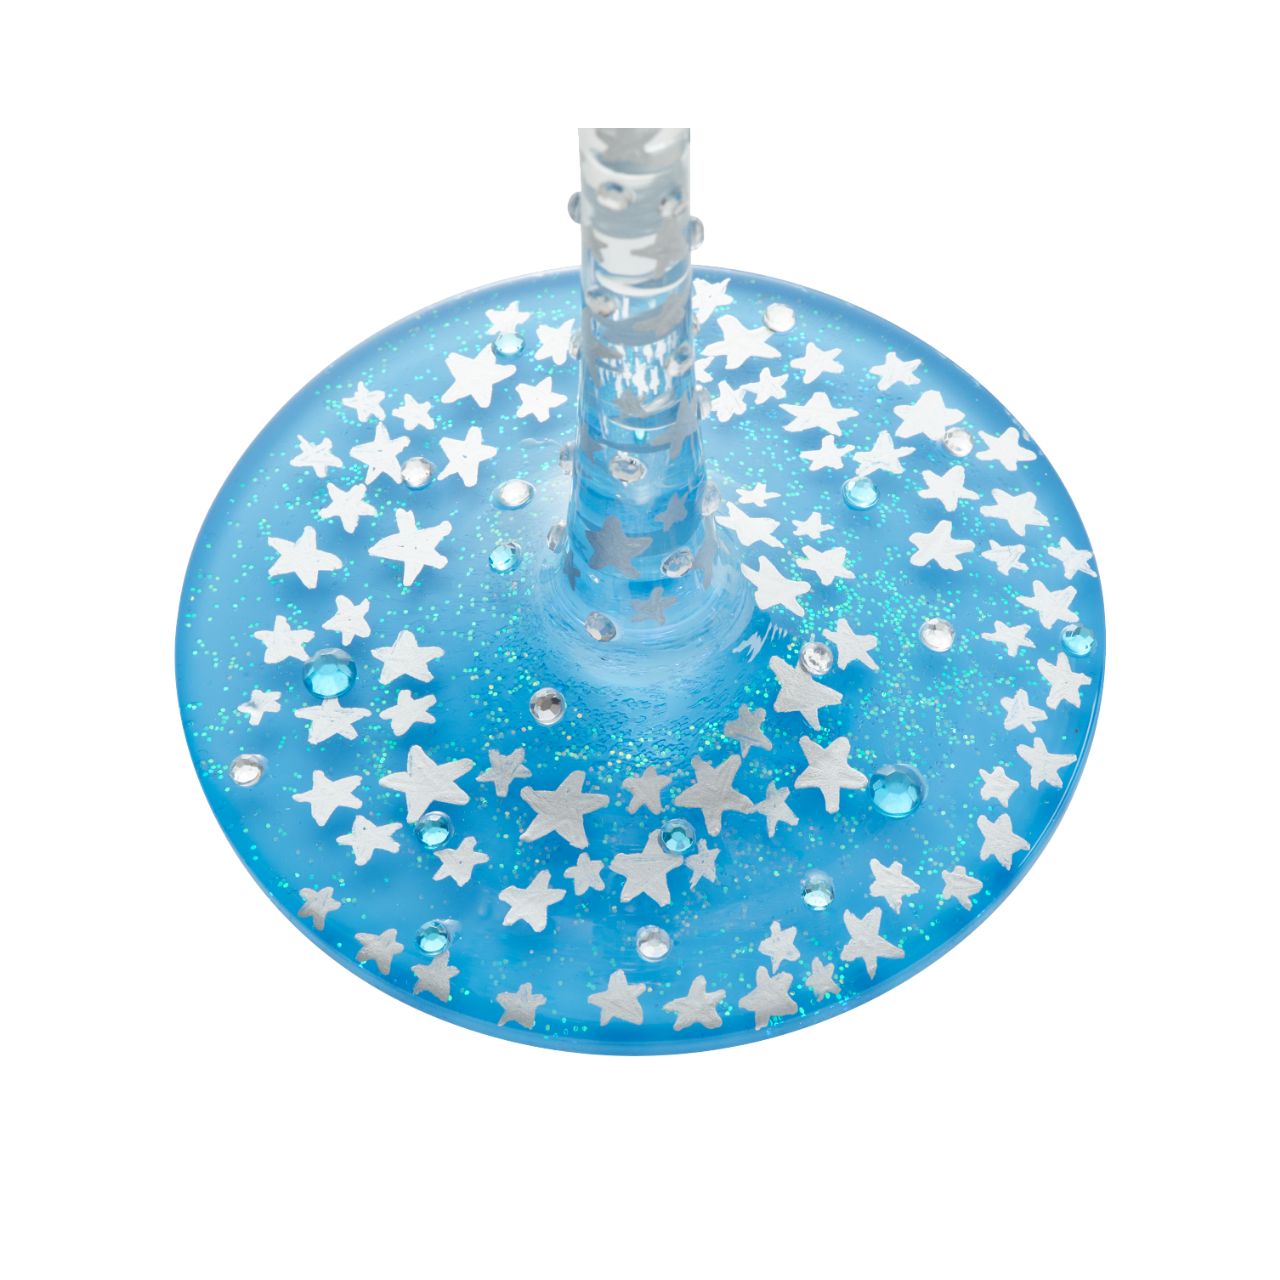 You're the Brightest Star Superbling Glass by Lolita  Some people come into our lives at our darkest time and bring with them enough light to steer us right. For those who brighten your day or night, celebrate their kindness and sparkle with this bedazzled wine glass.